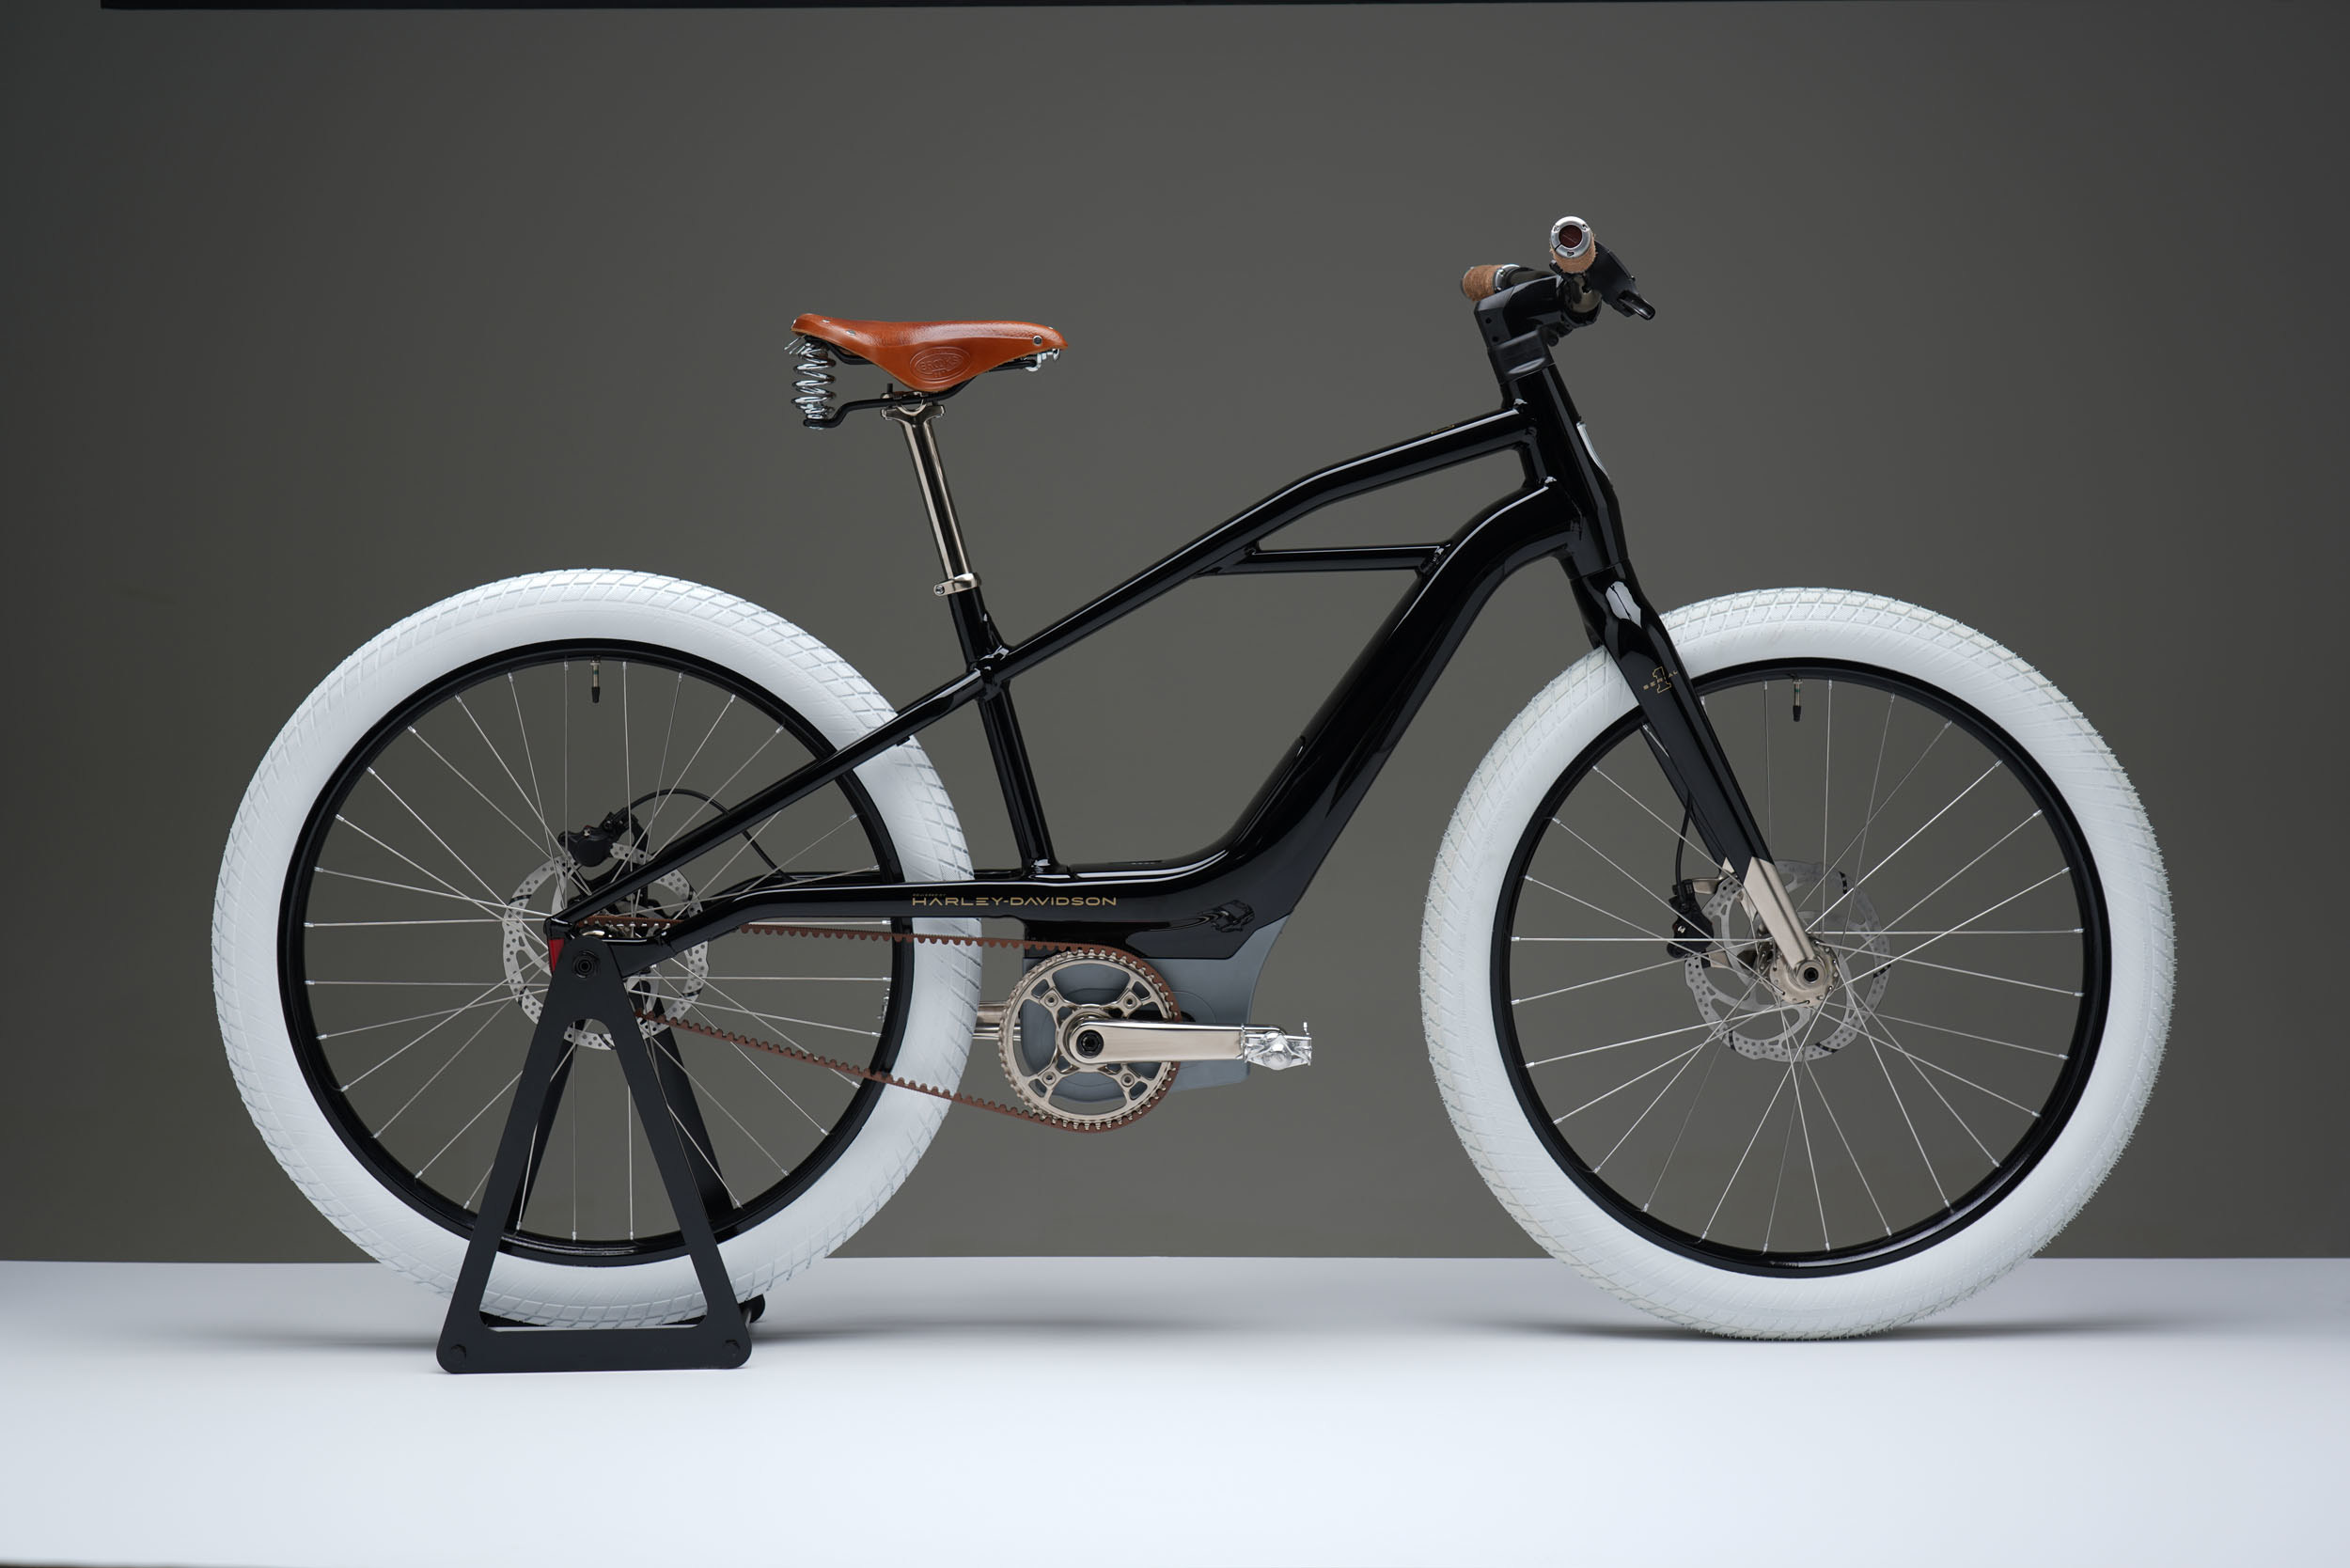 Harley’s first electric bicycle stands out with its retro style